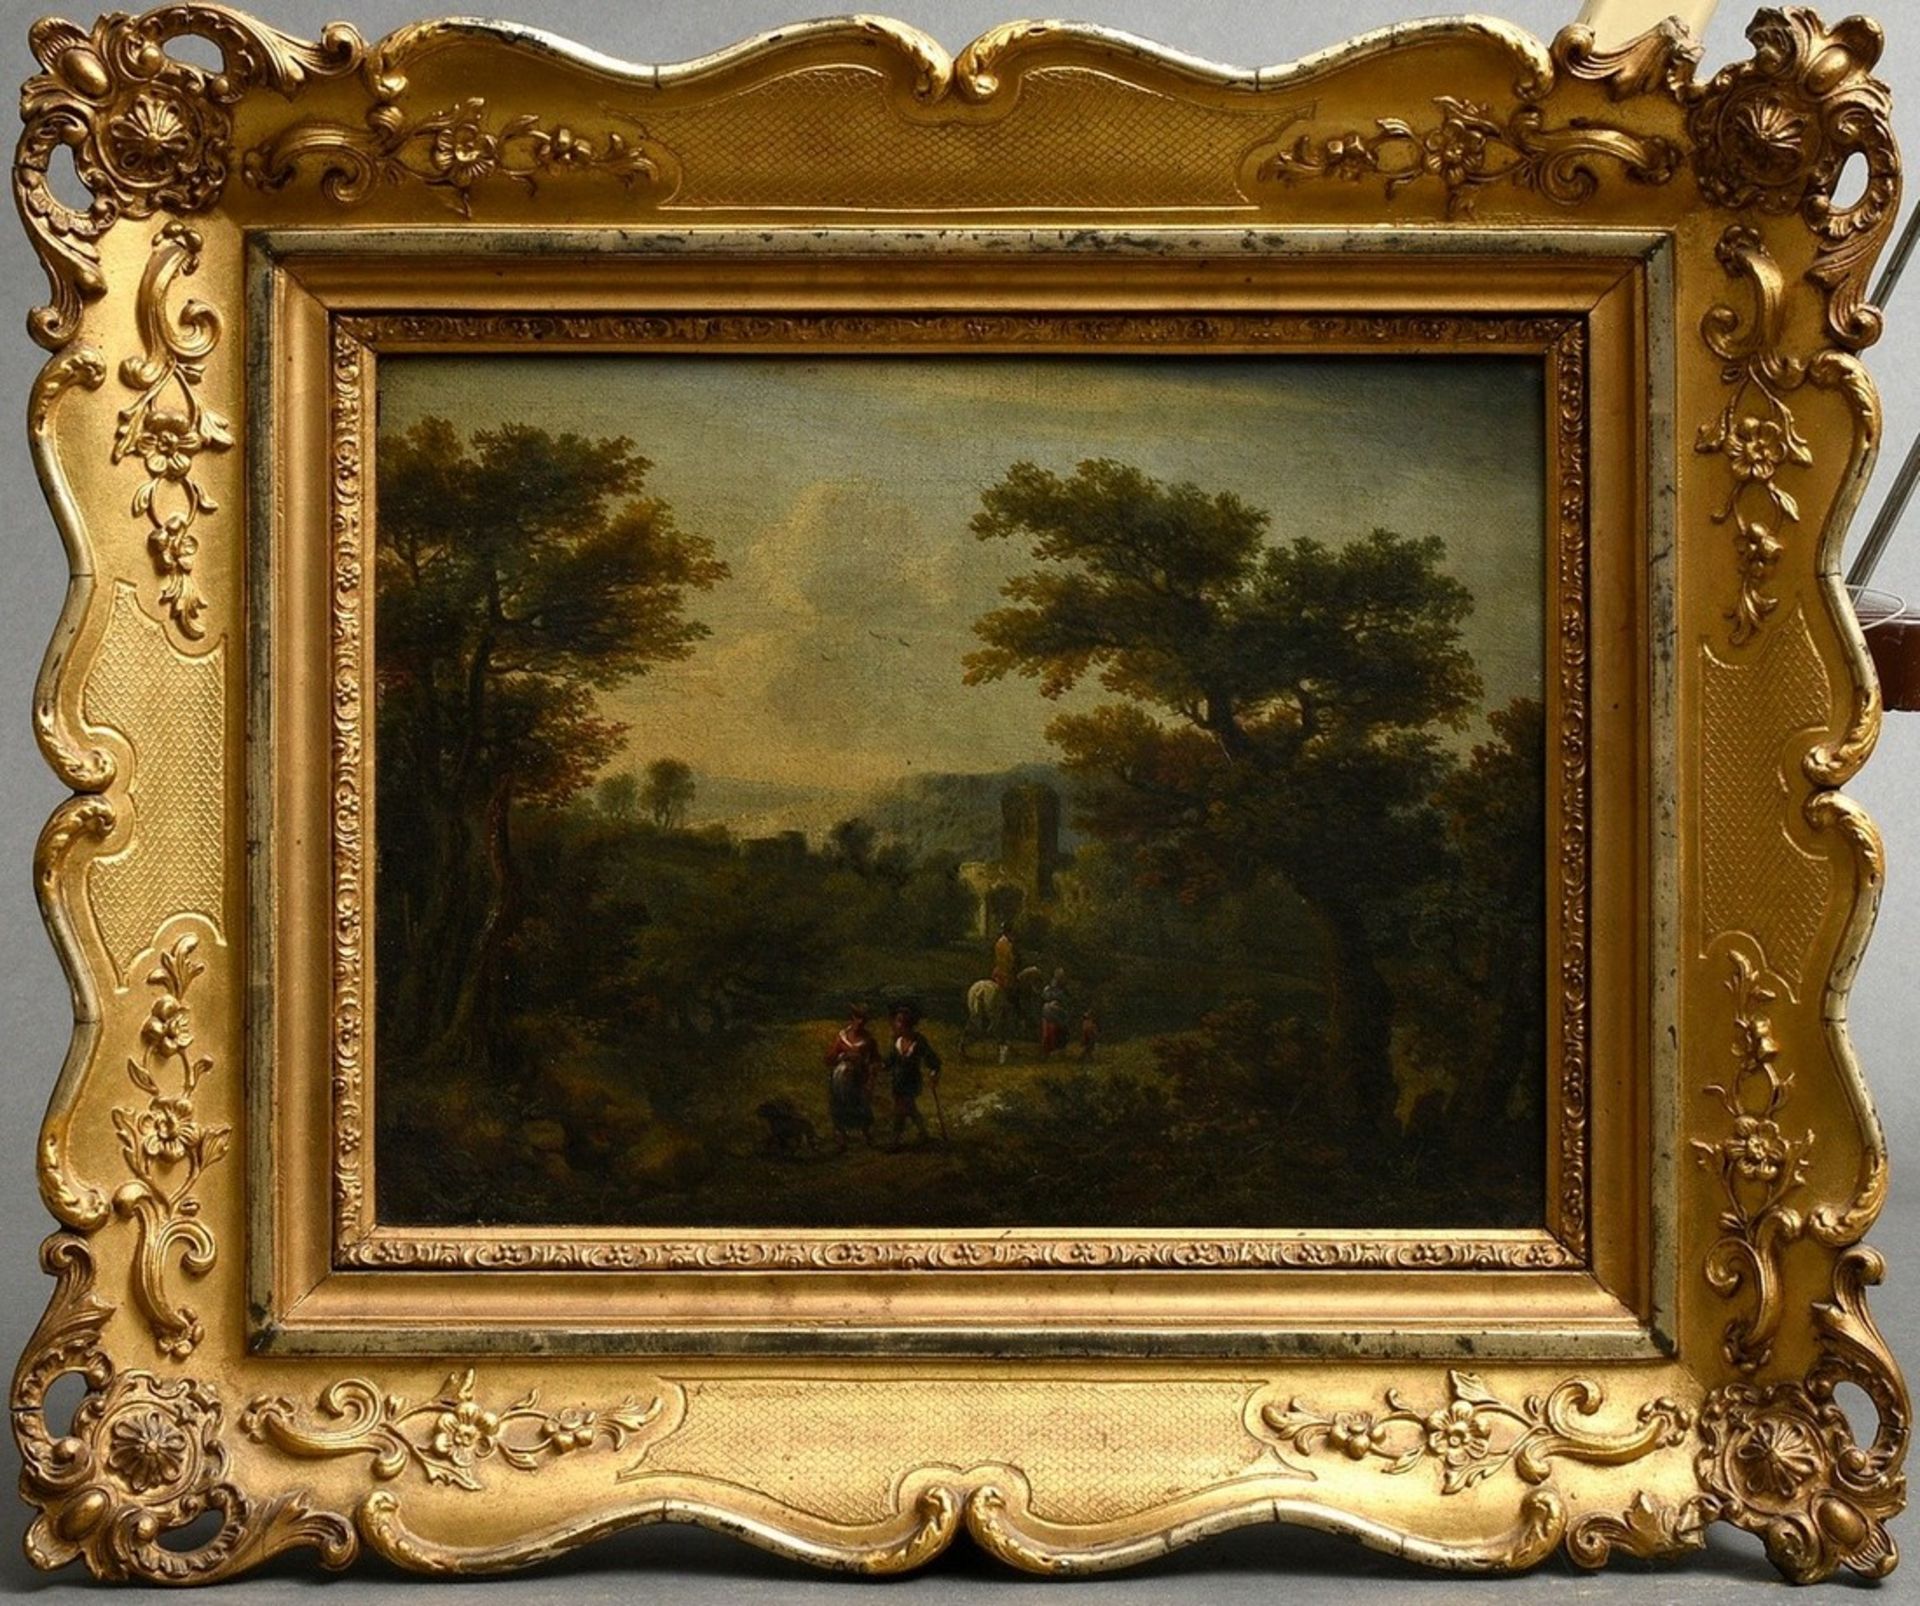 Pair of paintings by an unknown artist of the 18th c. "Landscapes with staffage of persons", oil/ca - Image 7 of 7